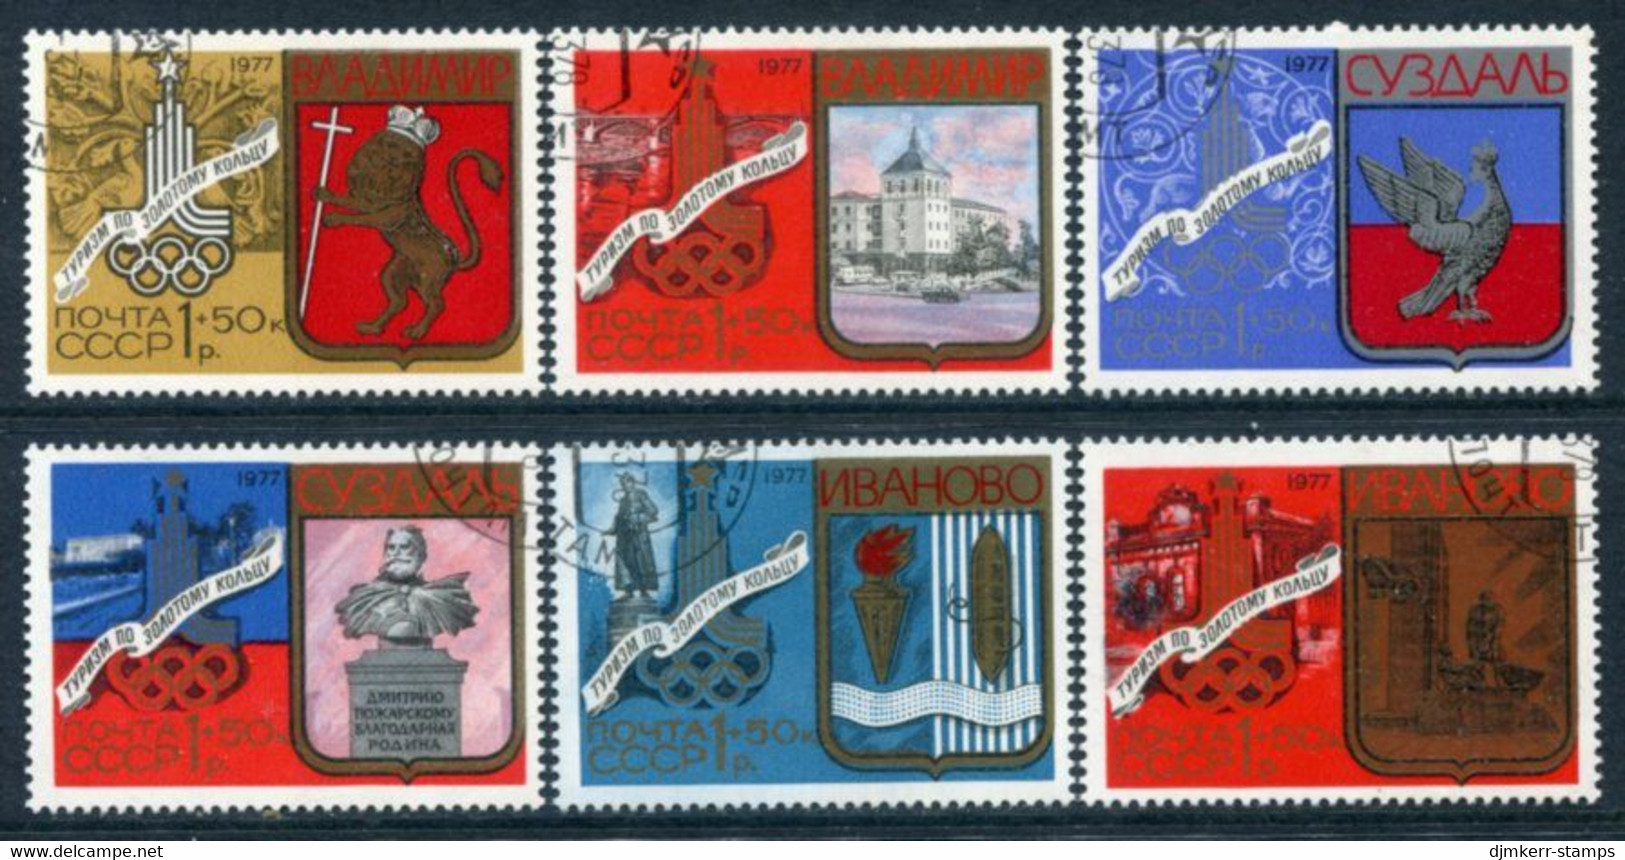 SOVIET UNION 1977 Moscow Olympics 1980: Cities Of The Golden Ring I Used.  Michel 4686-91 - Usati